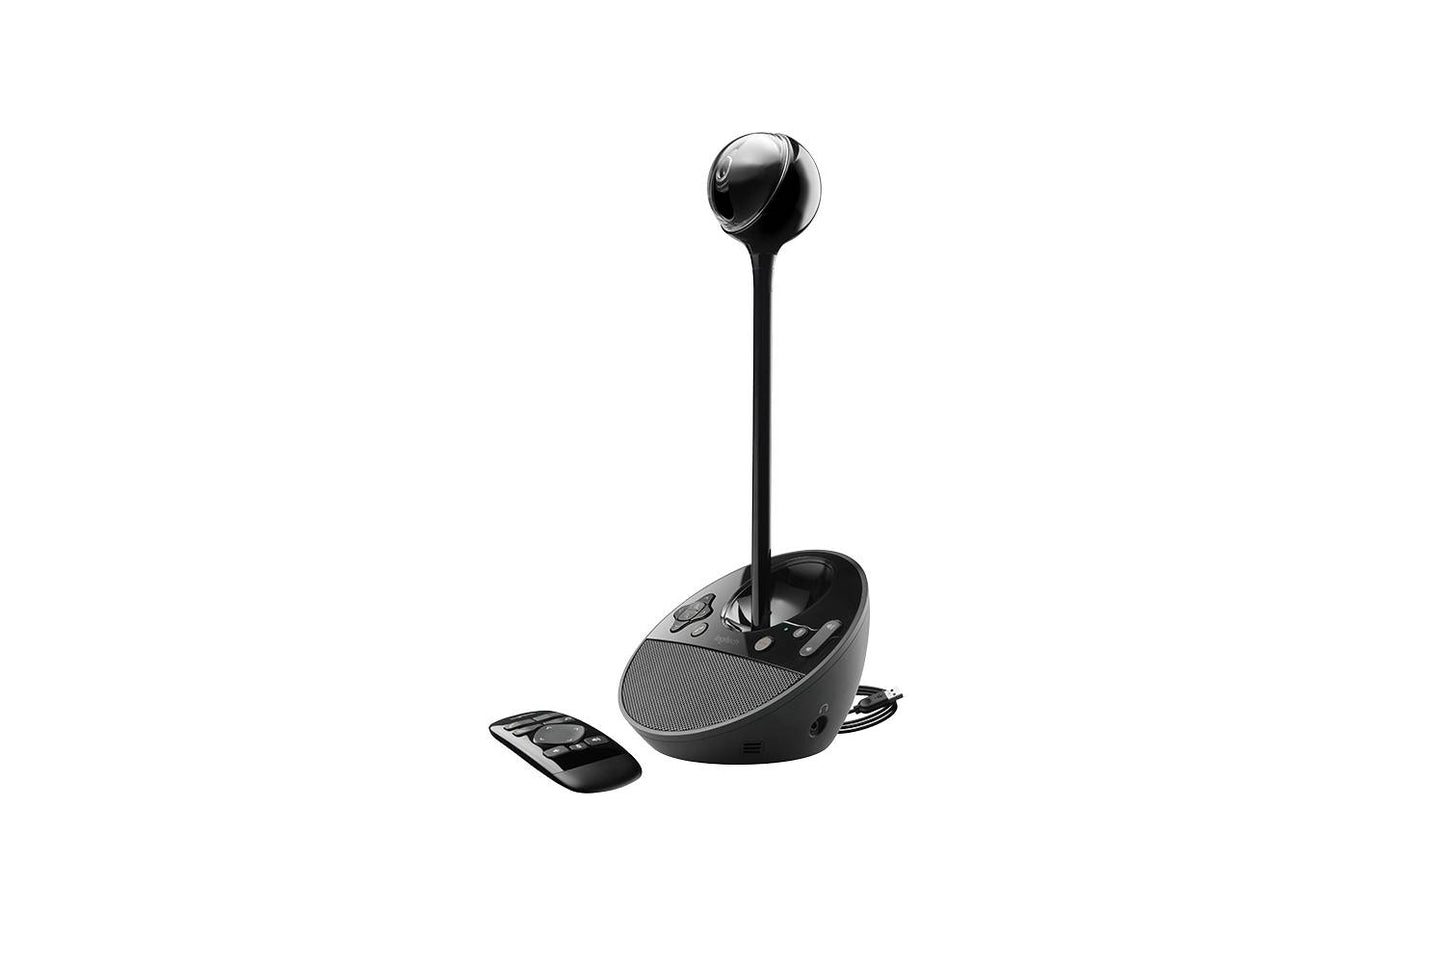 Logitech Conference Cam BCC950 Video Conference Webcam HD 1080p Camera with Built-In Speakerphone